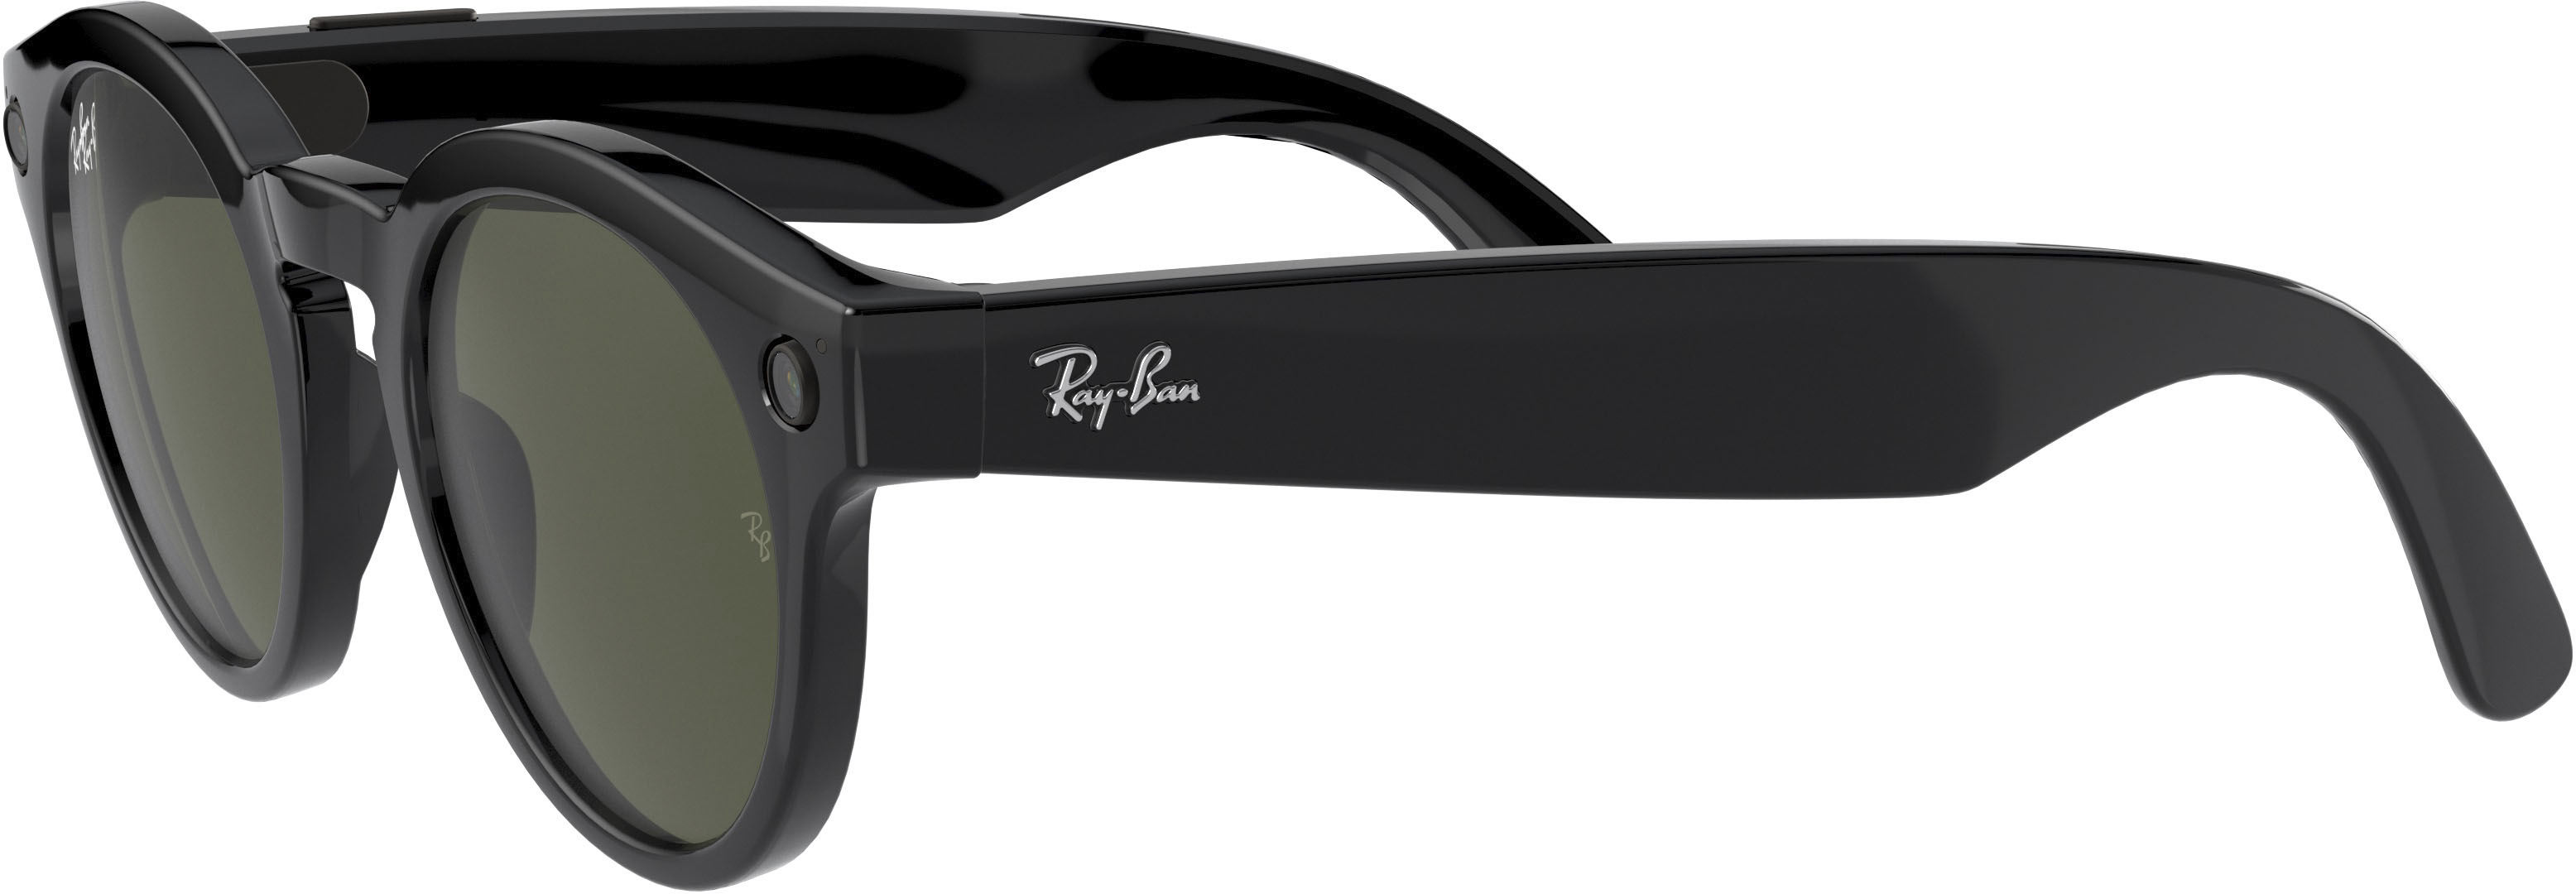 Left View: Ray-Ban - Stories Round Smart Glasses - Shiny Black/Green